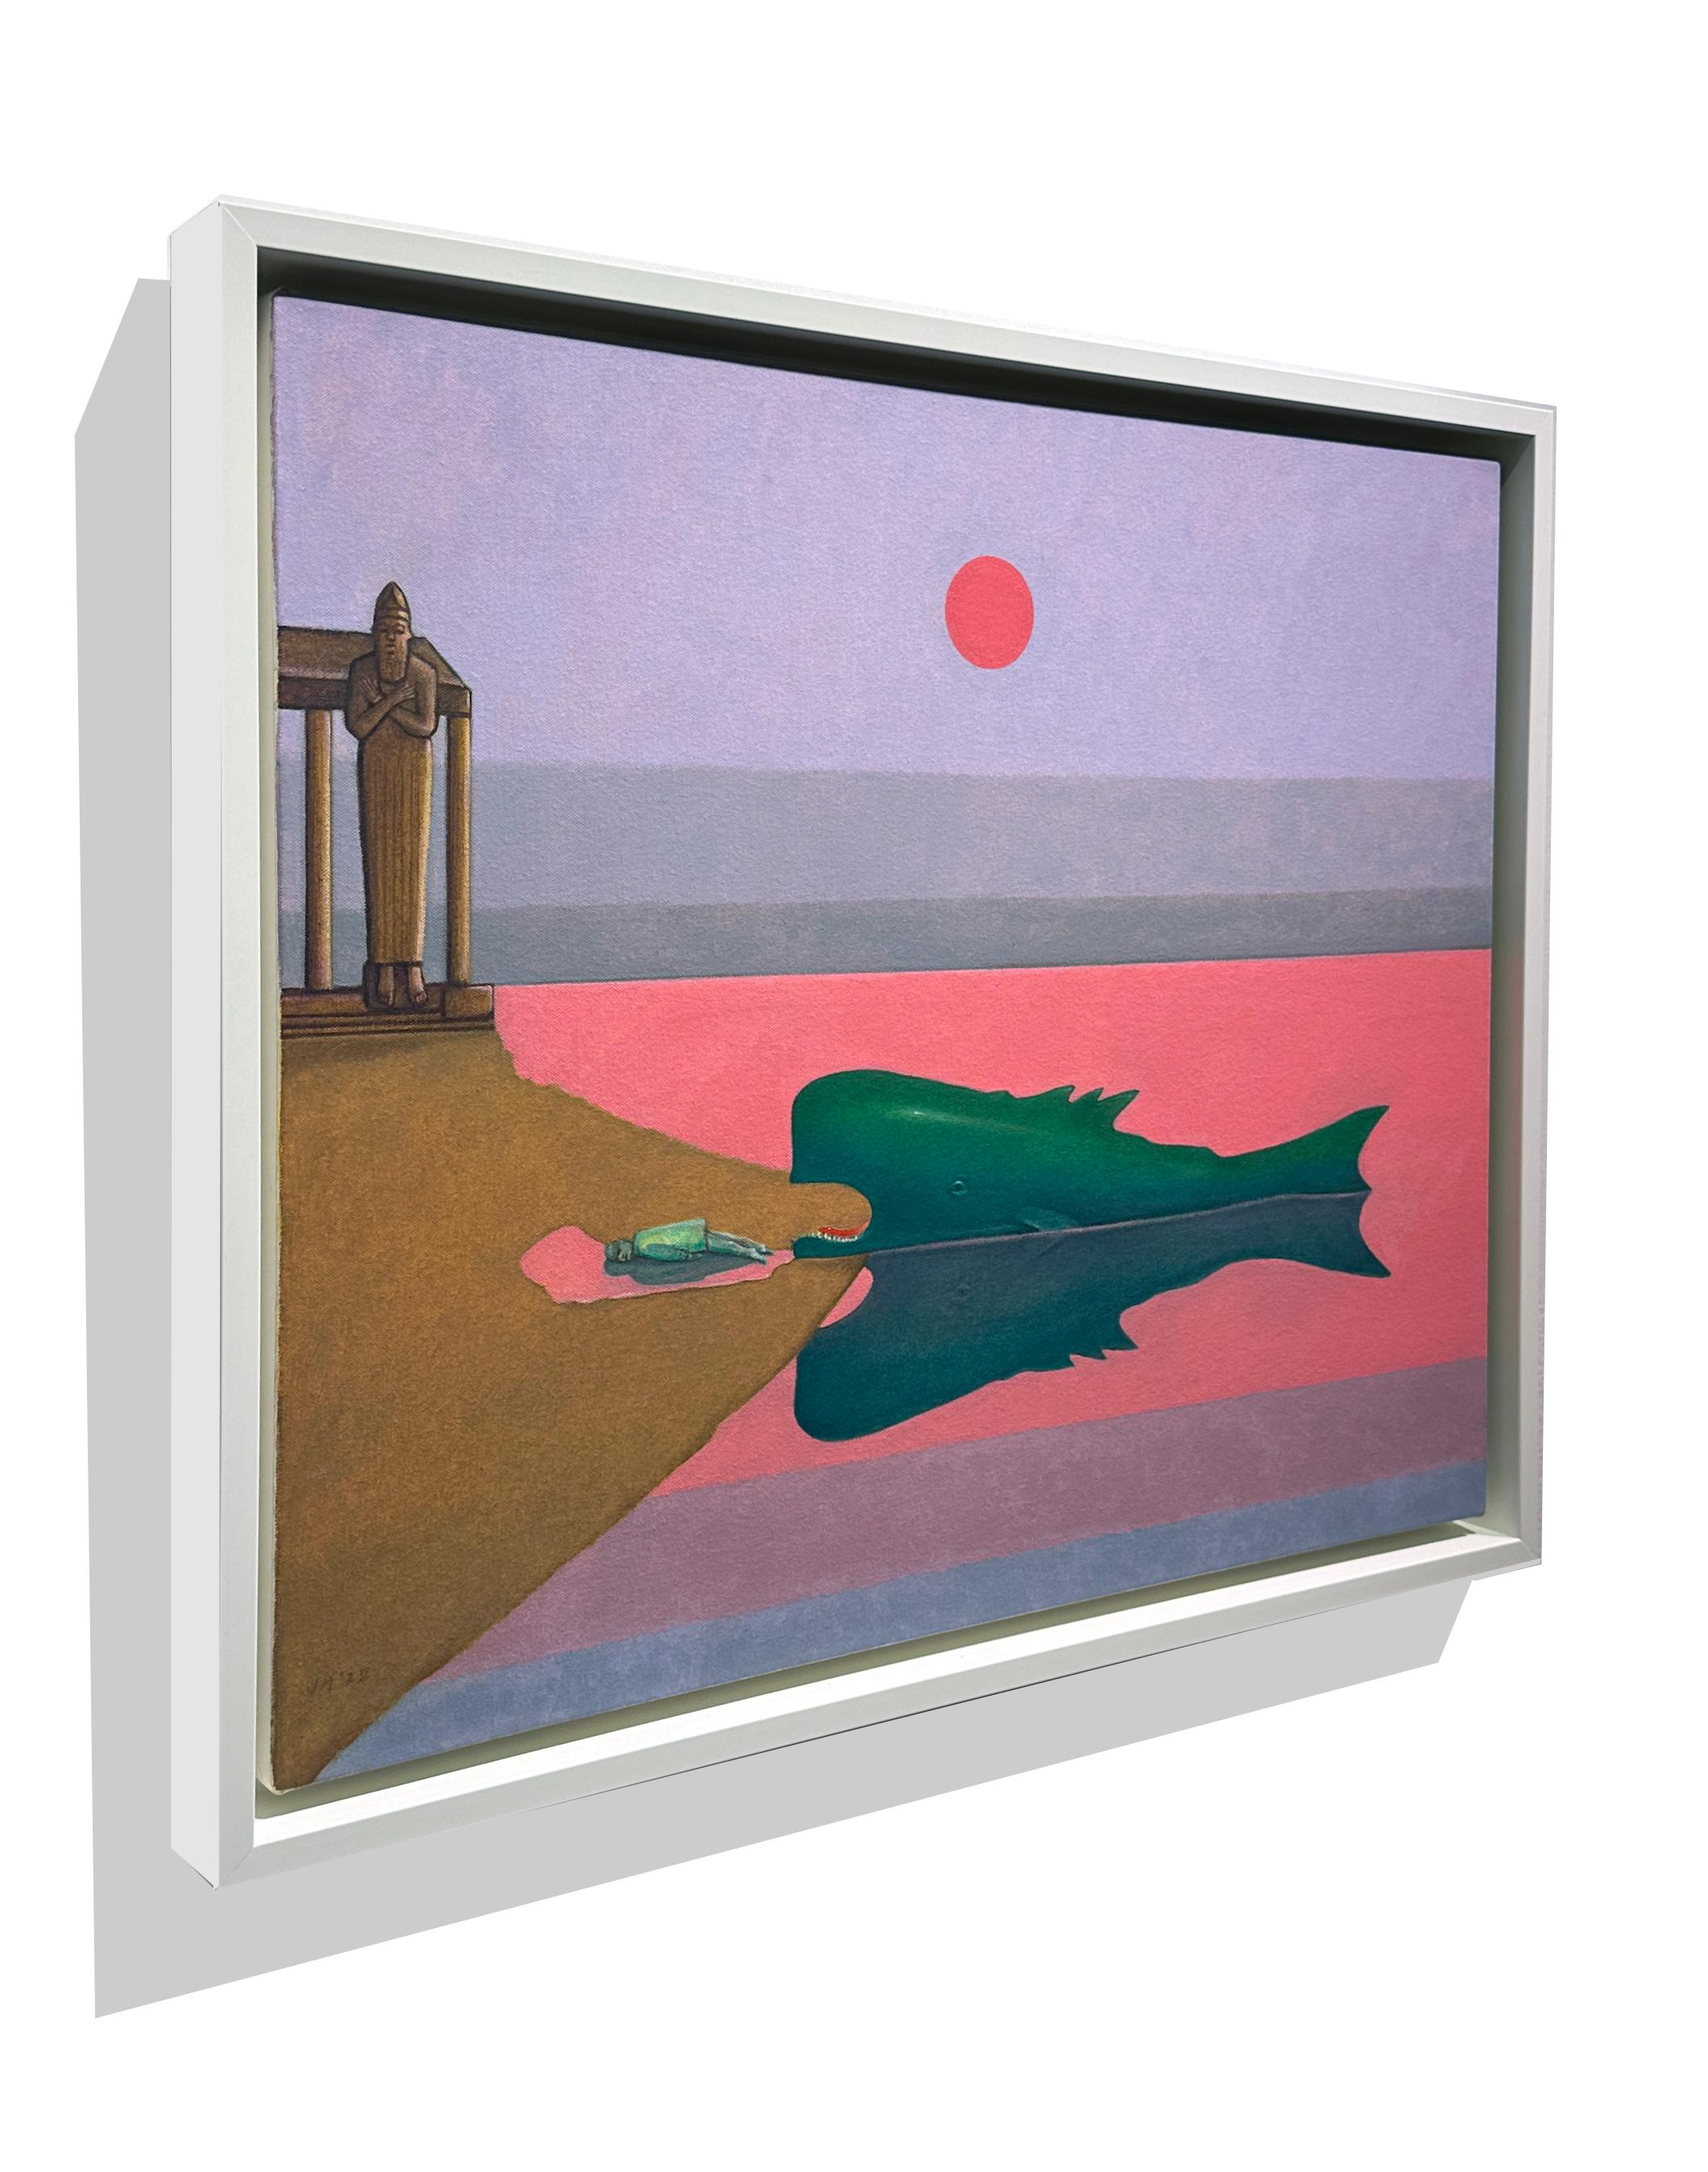 The stark, surreal scene of John Hrehov's painting tells the story of Jonah at the moment he was vomited onto shore after spending 3 days and 3 nights in the belly of a whale.  The landscape is devoid of detail but for the temple representing the